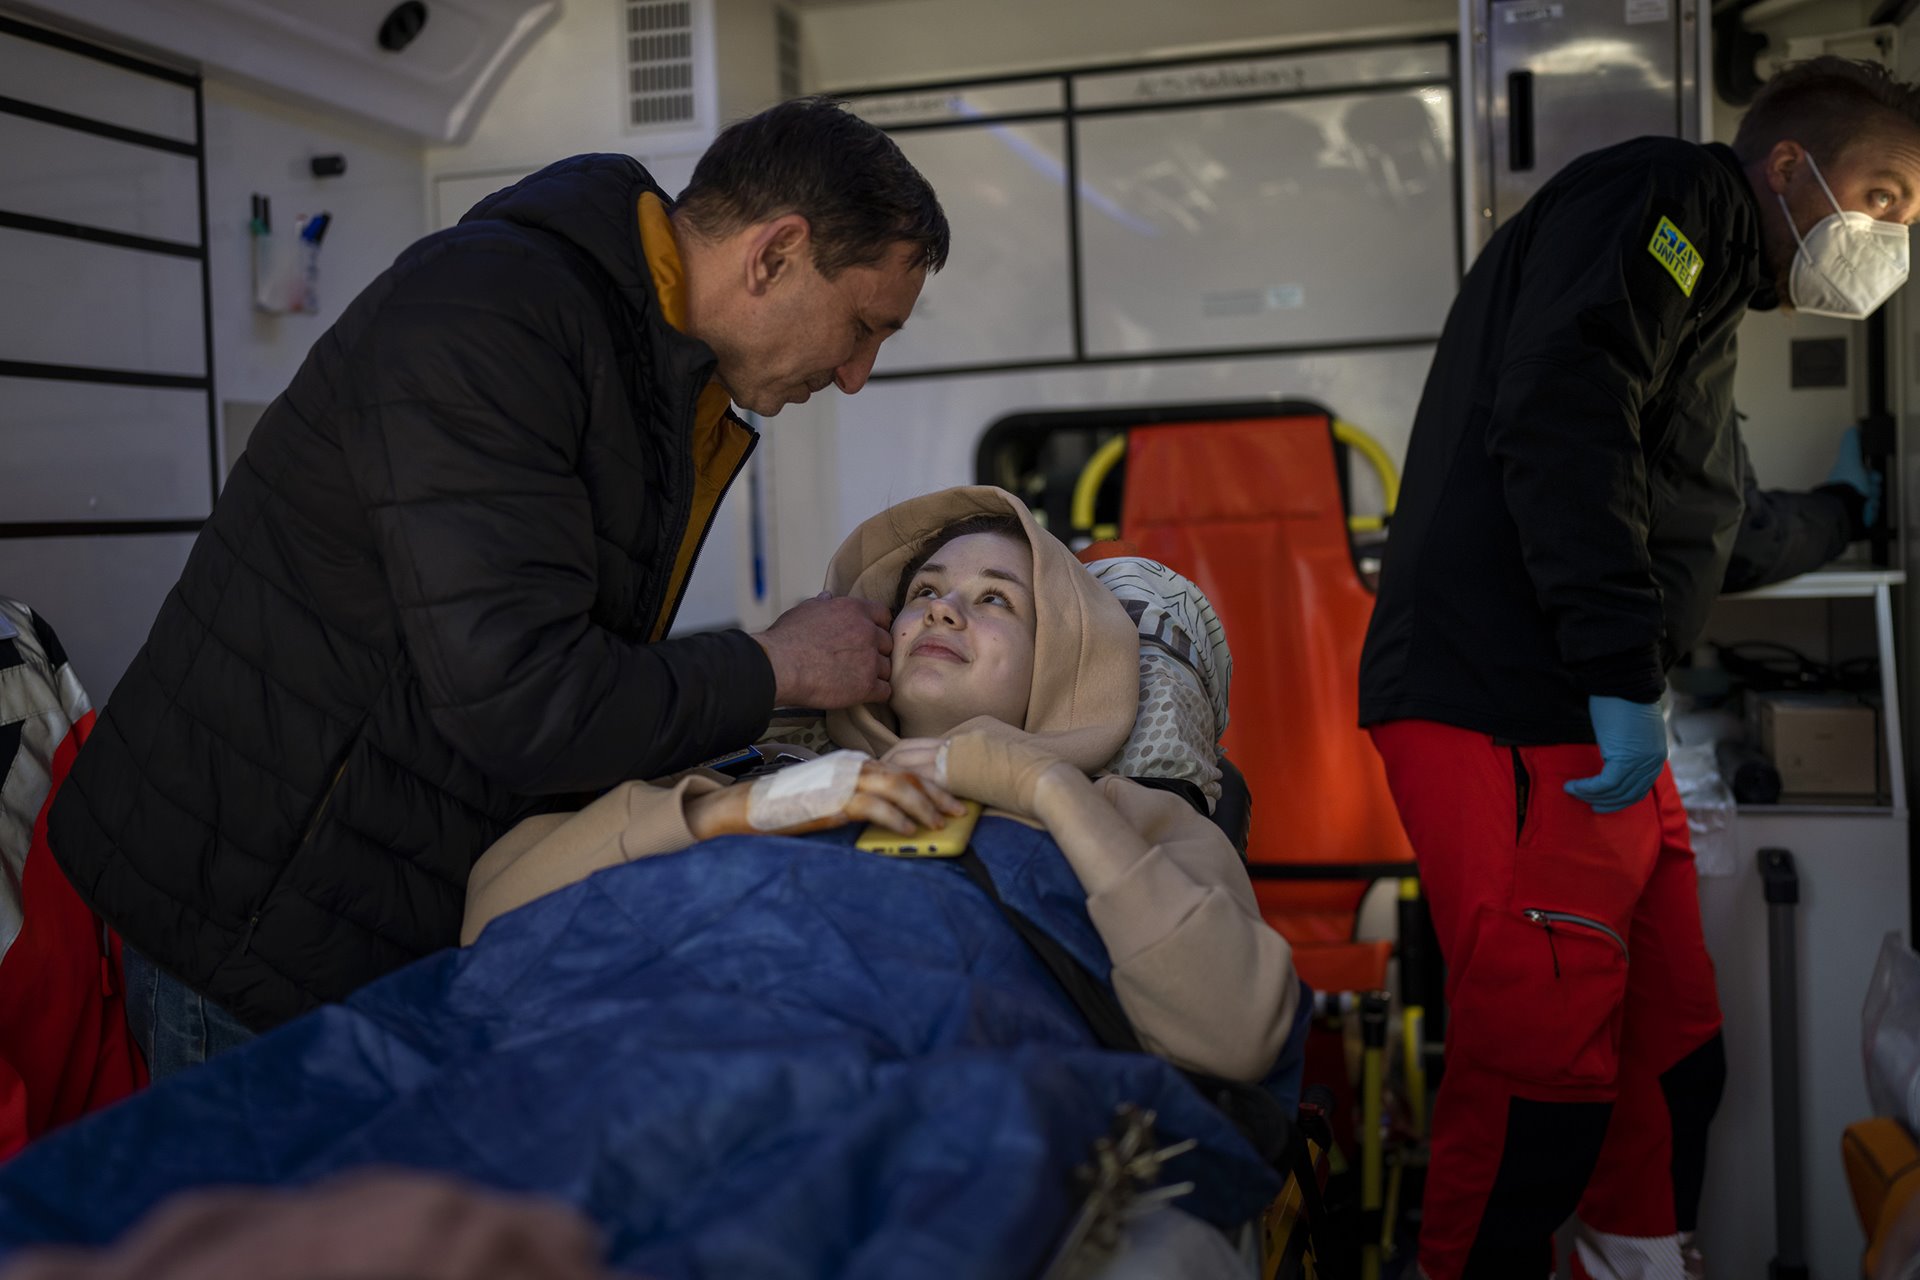 Nastia Kuzik (21) says goodbye to her father inside an ambulance, at a public hospital in Kyiv, Ukraine, as she is transferred to Germany for further treatment. Nastia lost her right leg below the knee and suffered serious injury to her left leg when she was caught in bombardment on the way back home from a visit to her brother, in Chernihiv, on 17 March. The city of Chernihiv, in northern Ukraine, was under siege from 24 February to early April.